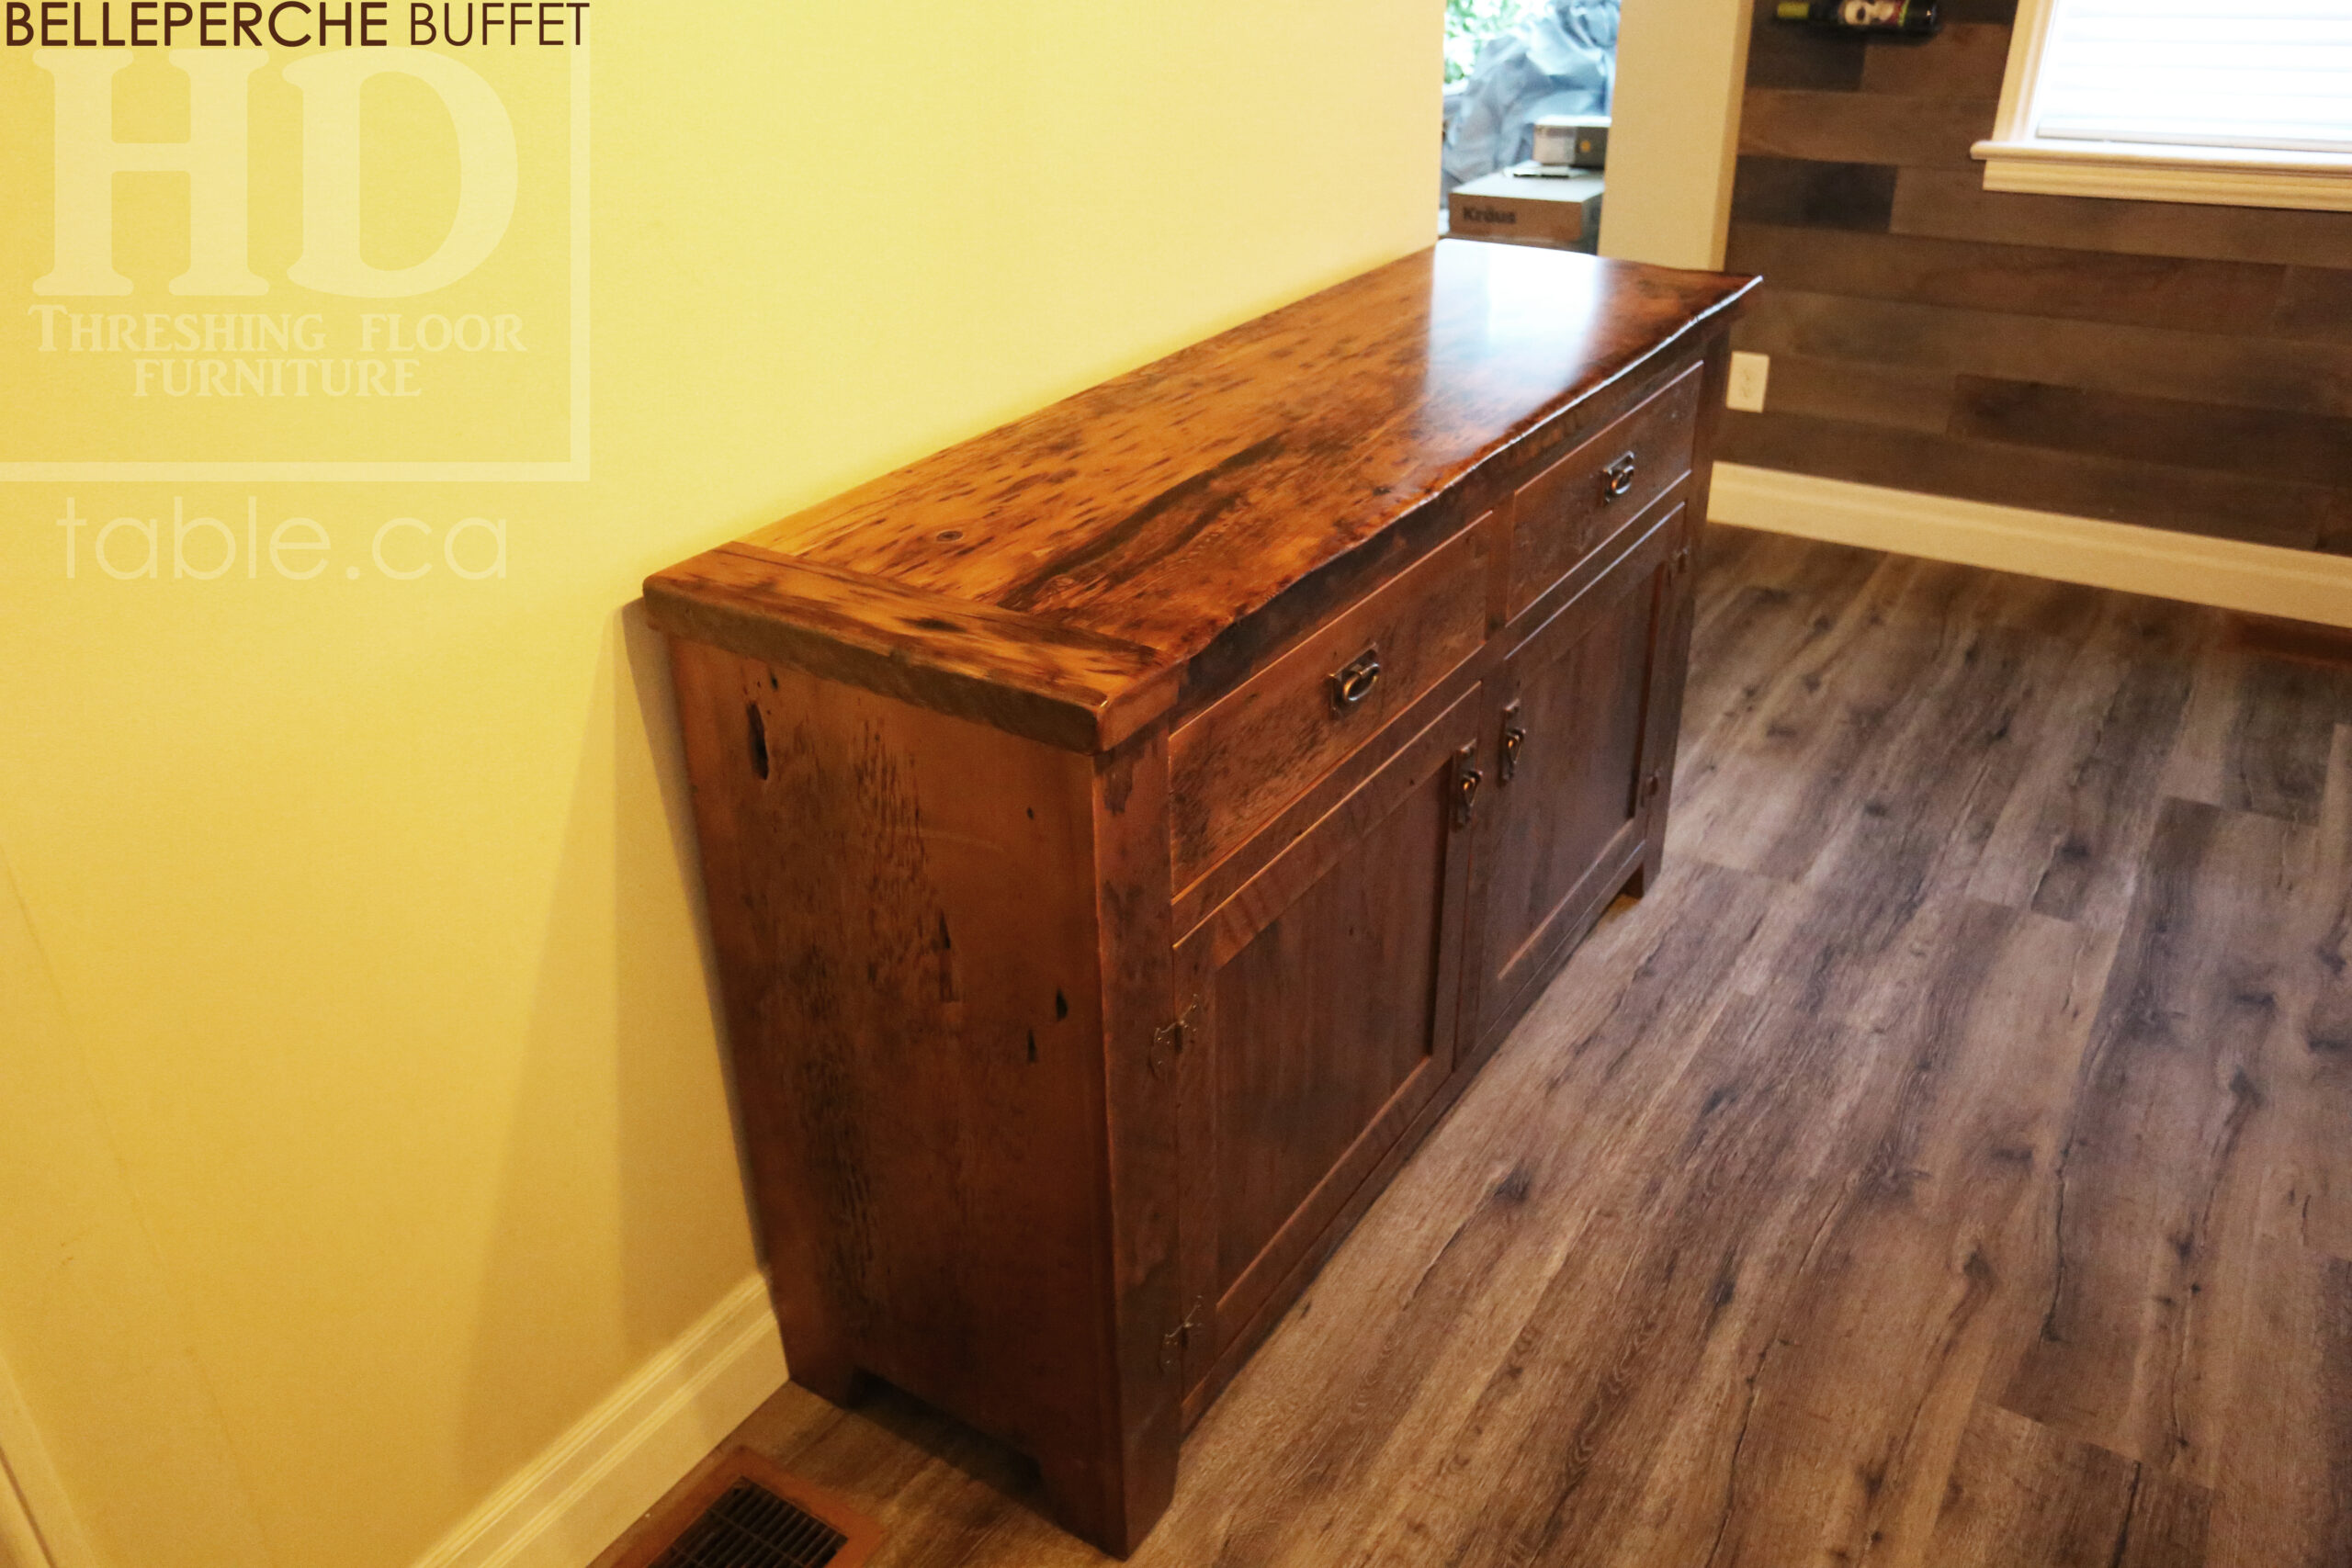 Project Summary: 60” Reclaimed Ontario Barnwood Buffet we made for a Windsor, Ontario Home – 18” deep – 36” [Counter] Height – 2 Top Drawers / 2 Bottom Doors with Internal Adjustable Shelving - Old Growth Hemlock Threshing Floor Construction – Cast Brass Lee Valley Hardware - Original edges & distressing maintained – Bread Edge Boards - Premium epoxy + satin polyurethane finish - www.table.ca